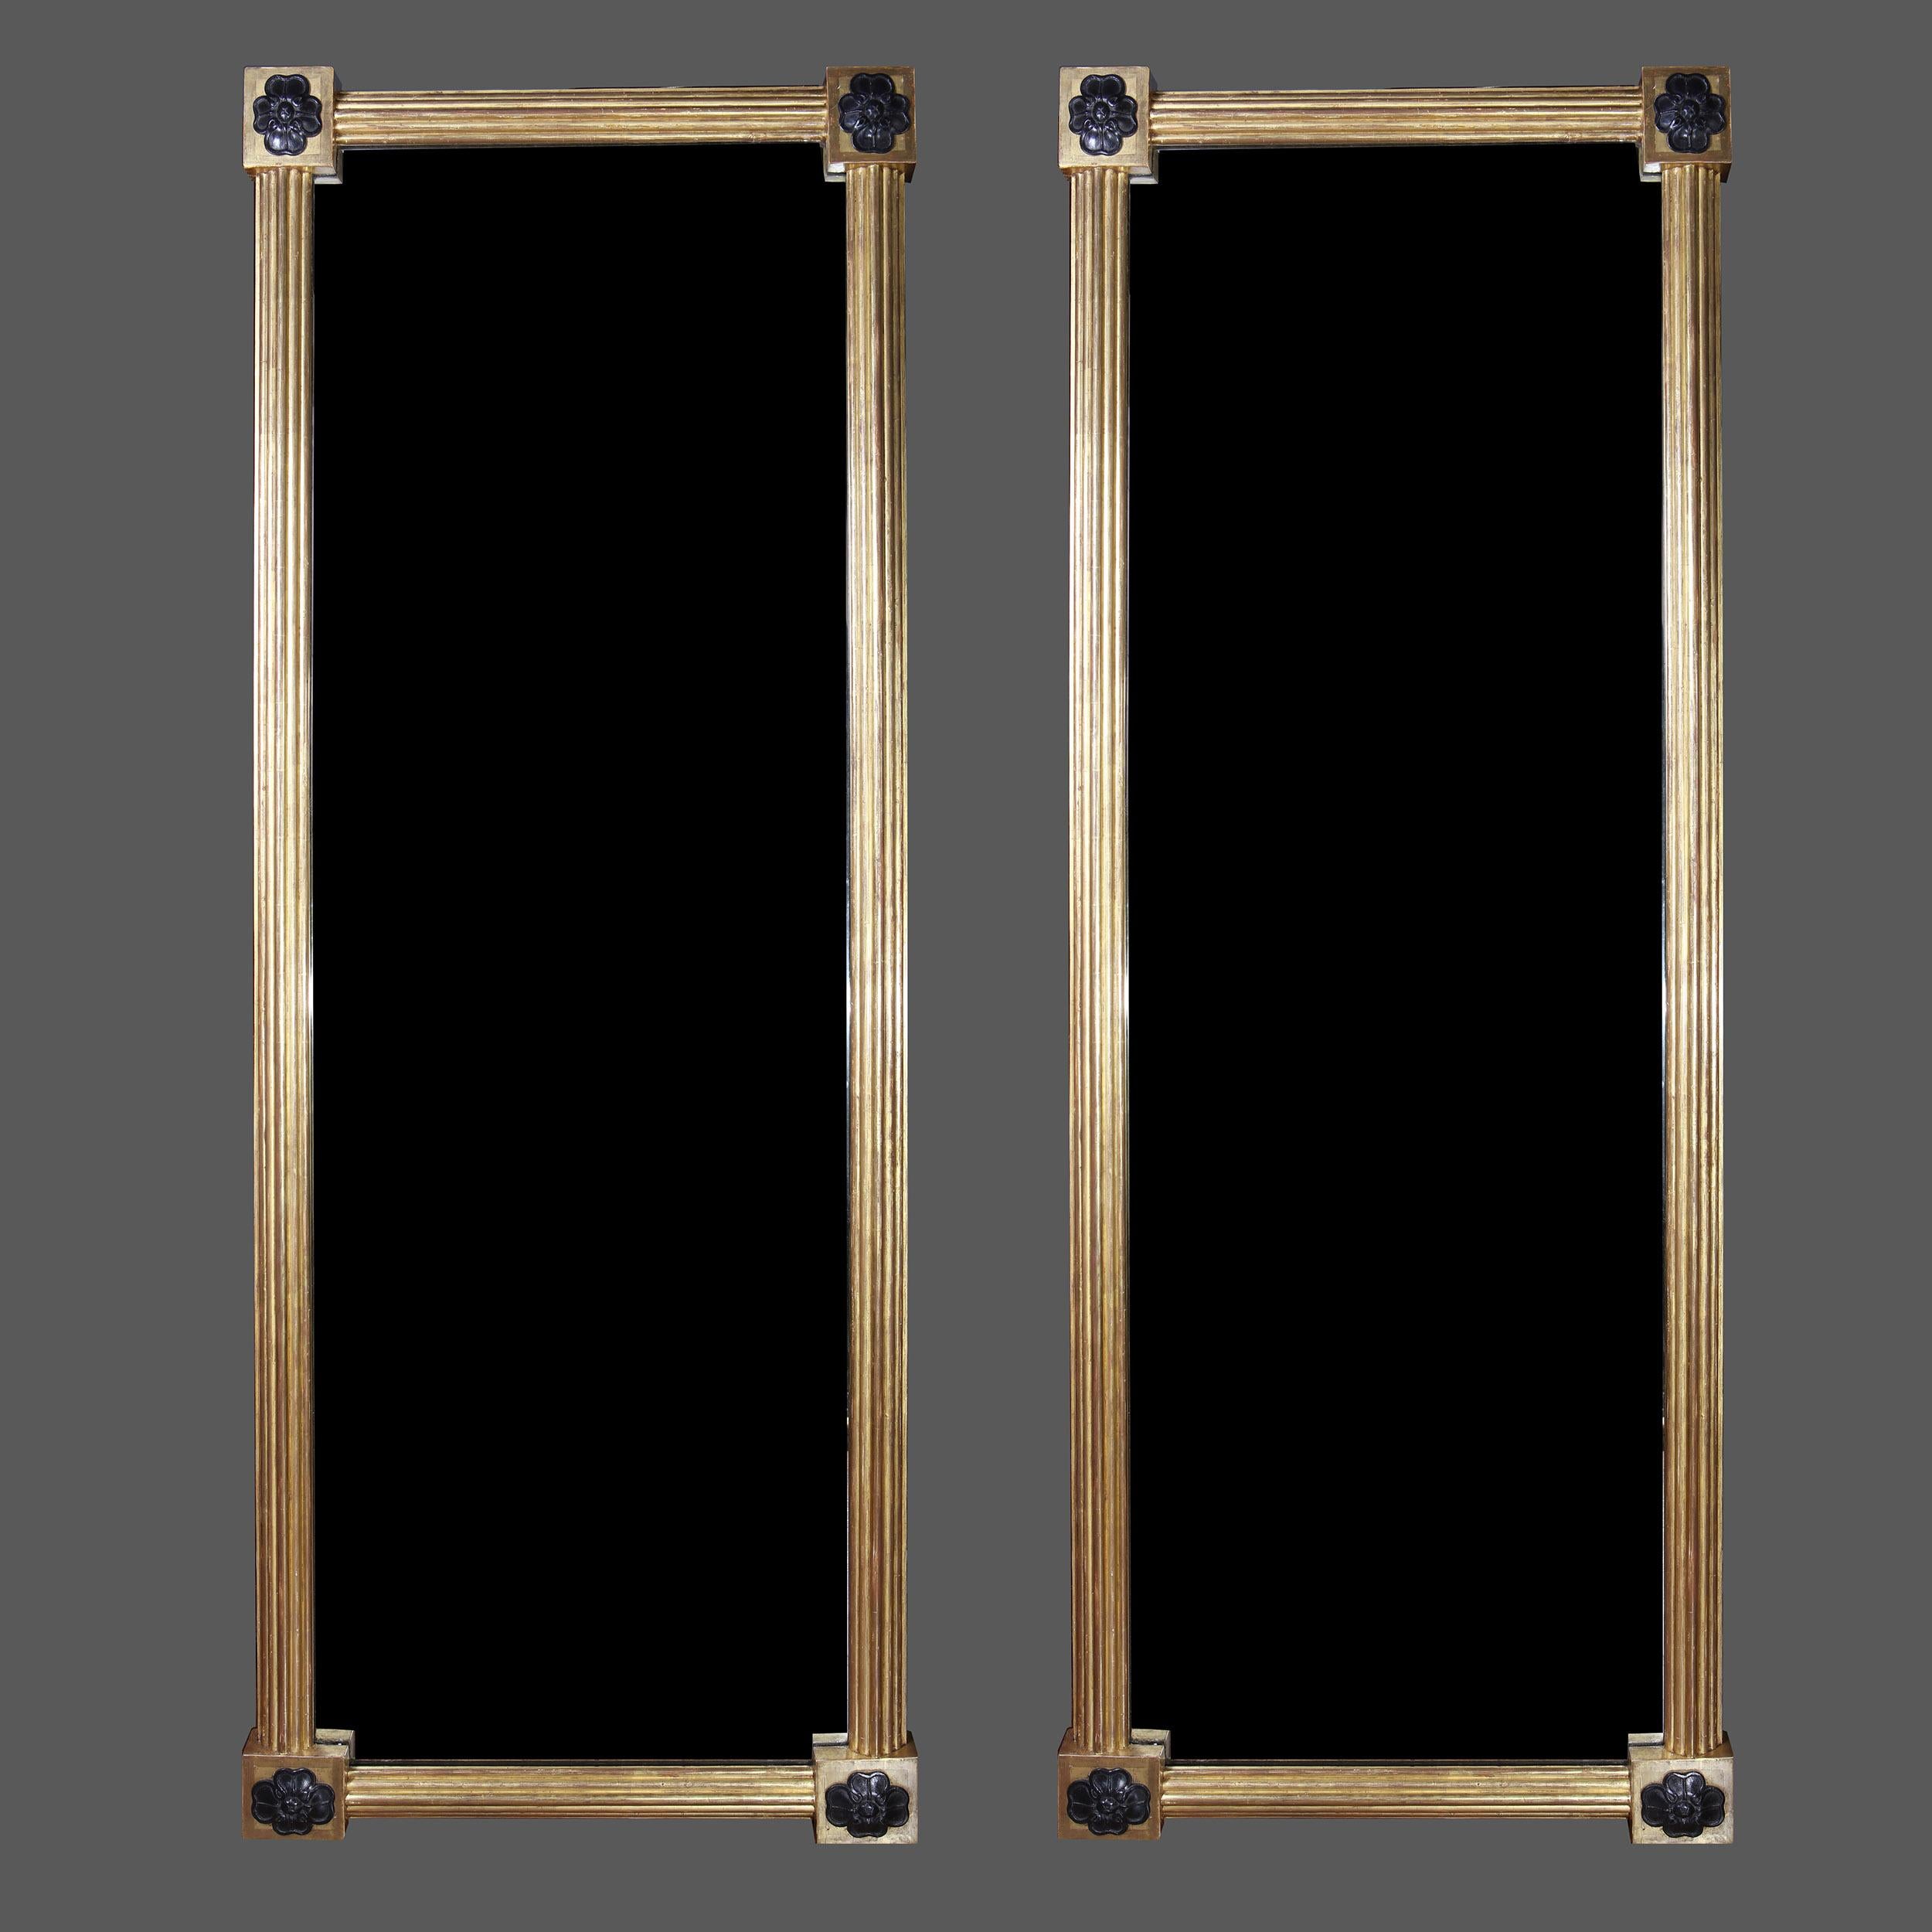 These 19th-century Regency giltwood pier mirrors are impressive pieces of antique furniture that would add elevation and refinement to any room. The dimensions of the mirrors are 203 cm (80 inches) in height and 76 cm (30 inches) in width.

The